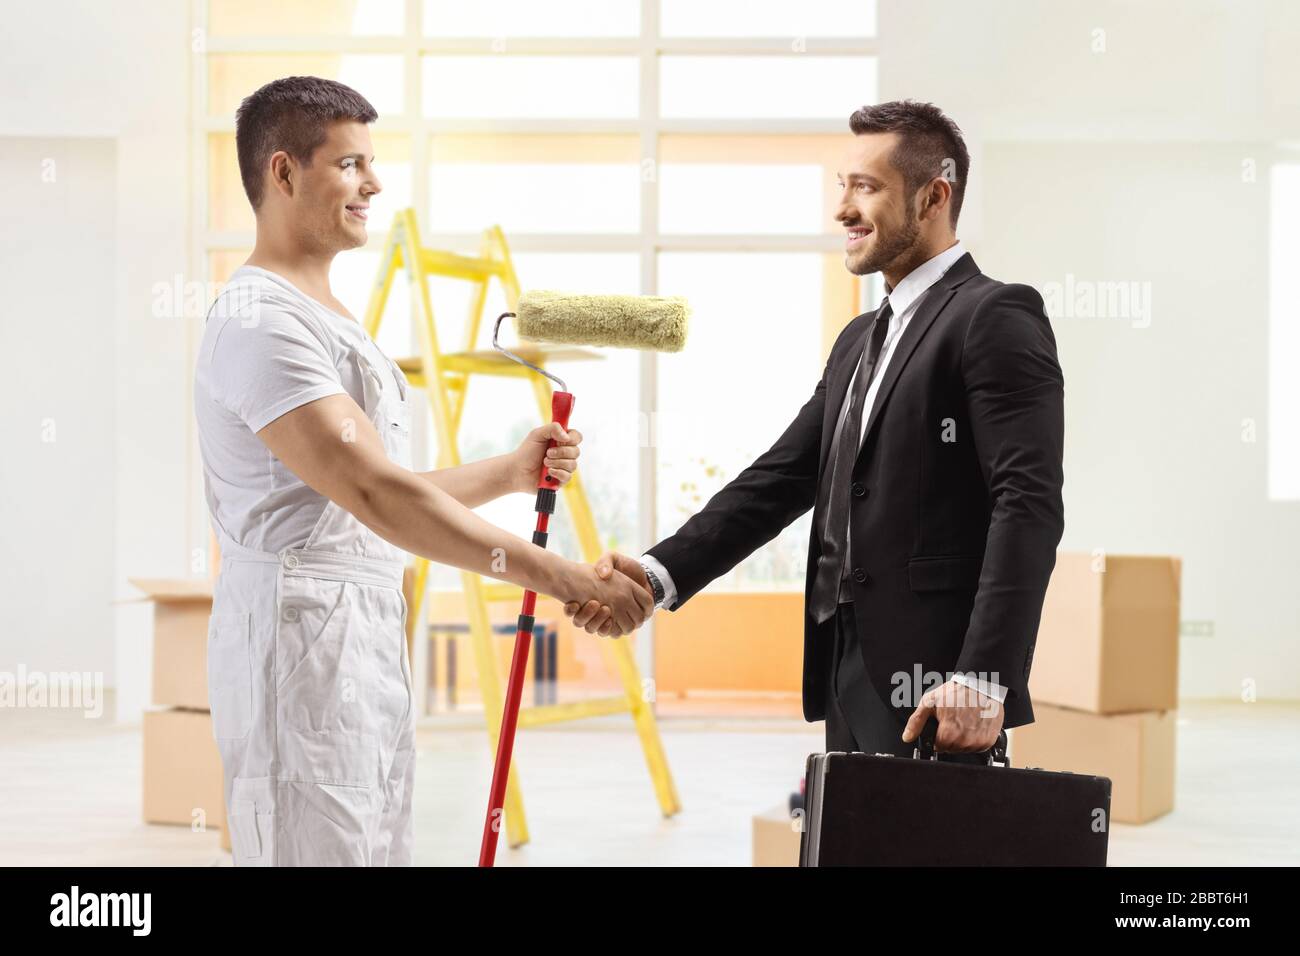 Decorator with a paint roller shaking hands with a businessman Stock Photo